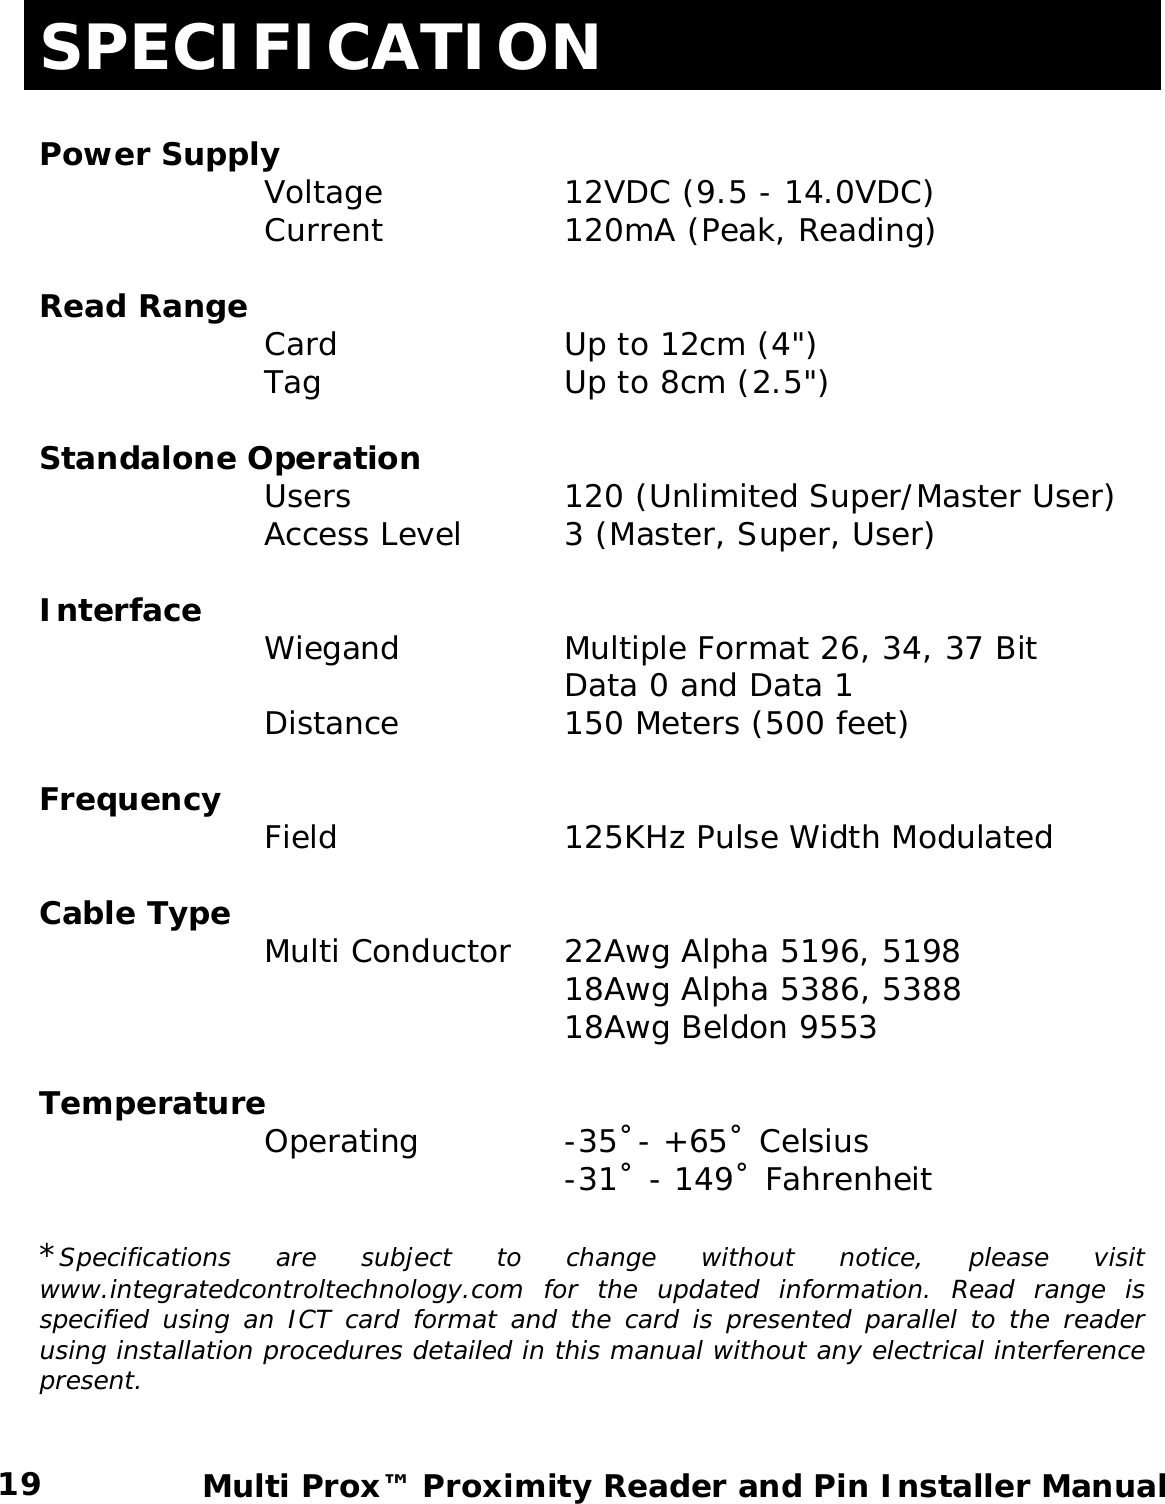 SPECIFICATION  Power Supply    Voltage   12VDC (9.5 - 14.0VDC) Current   120mA (Peak, Reading)  Read Range       Card    Up to 12cm (4&quot;)    Tag    Up to 8cm (2.5&quot;)  Standalone Operation      Users   120 (Unlimited Super/Master User)    Access Level  3 (Master, Super, User)  Interface    Wiegand   Multiple Format 26, 34, 37 Bit        Data 0 and Data 1 Distance     150 Meters (500 feet)    Frequency    Field    125KHz Pulse Width Modulated  Cable Type       Multi Conductor 22Awg Alpha 5196, 5198        18Awg Alpha 5386, 5388        18Awg Beldon 9553  Temperature    Operating  -35˚- +65˚ Celsius        -31˚ - 149˚ Fahrenheit  *Specifications are subject to change without notice, please visit www.integratedcontroltechnology.com for the updated information. Read range is specified using an ICT card format and the card is presented parallel to the reader using installation procedures detailed in this manual without any electrical interference present.    19  Multi Prox™ Proximity Reader and Pin Installer Manual  